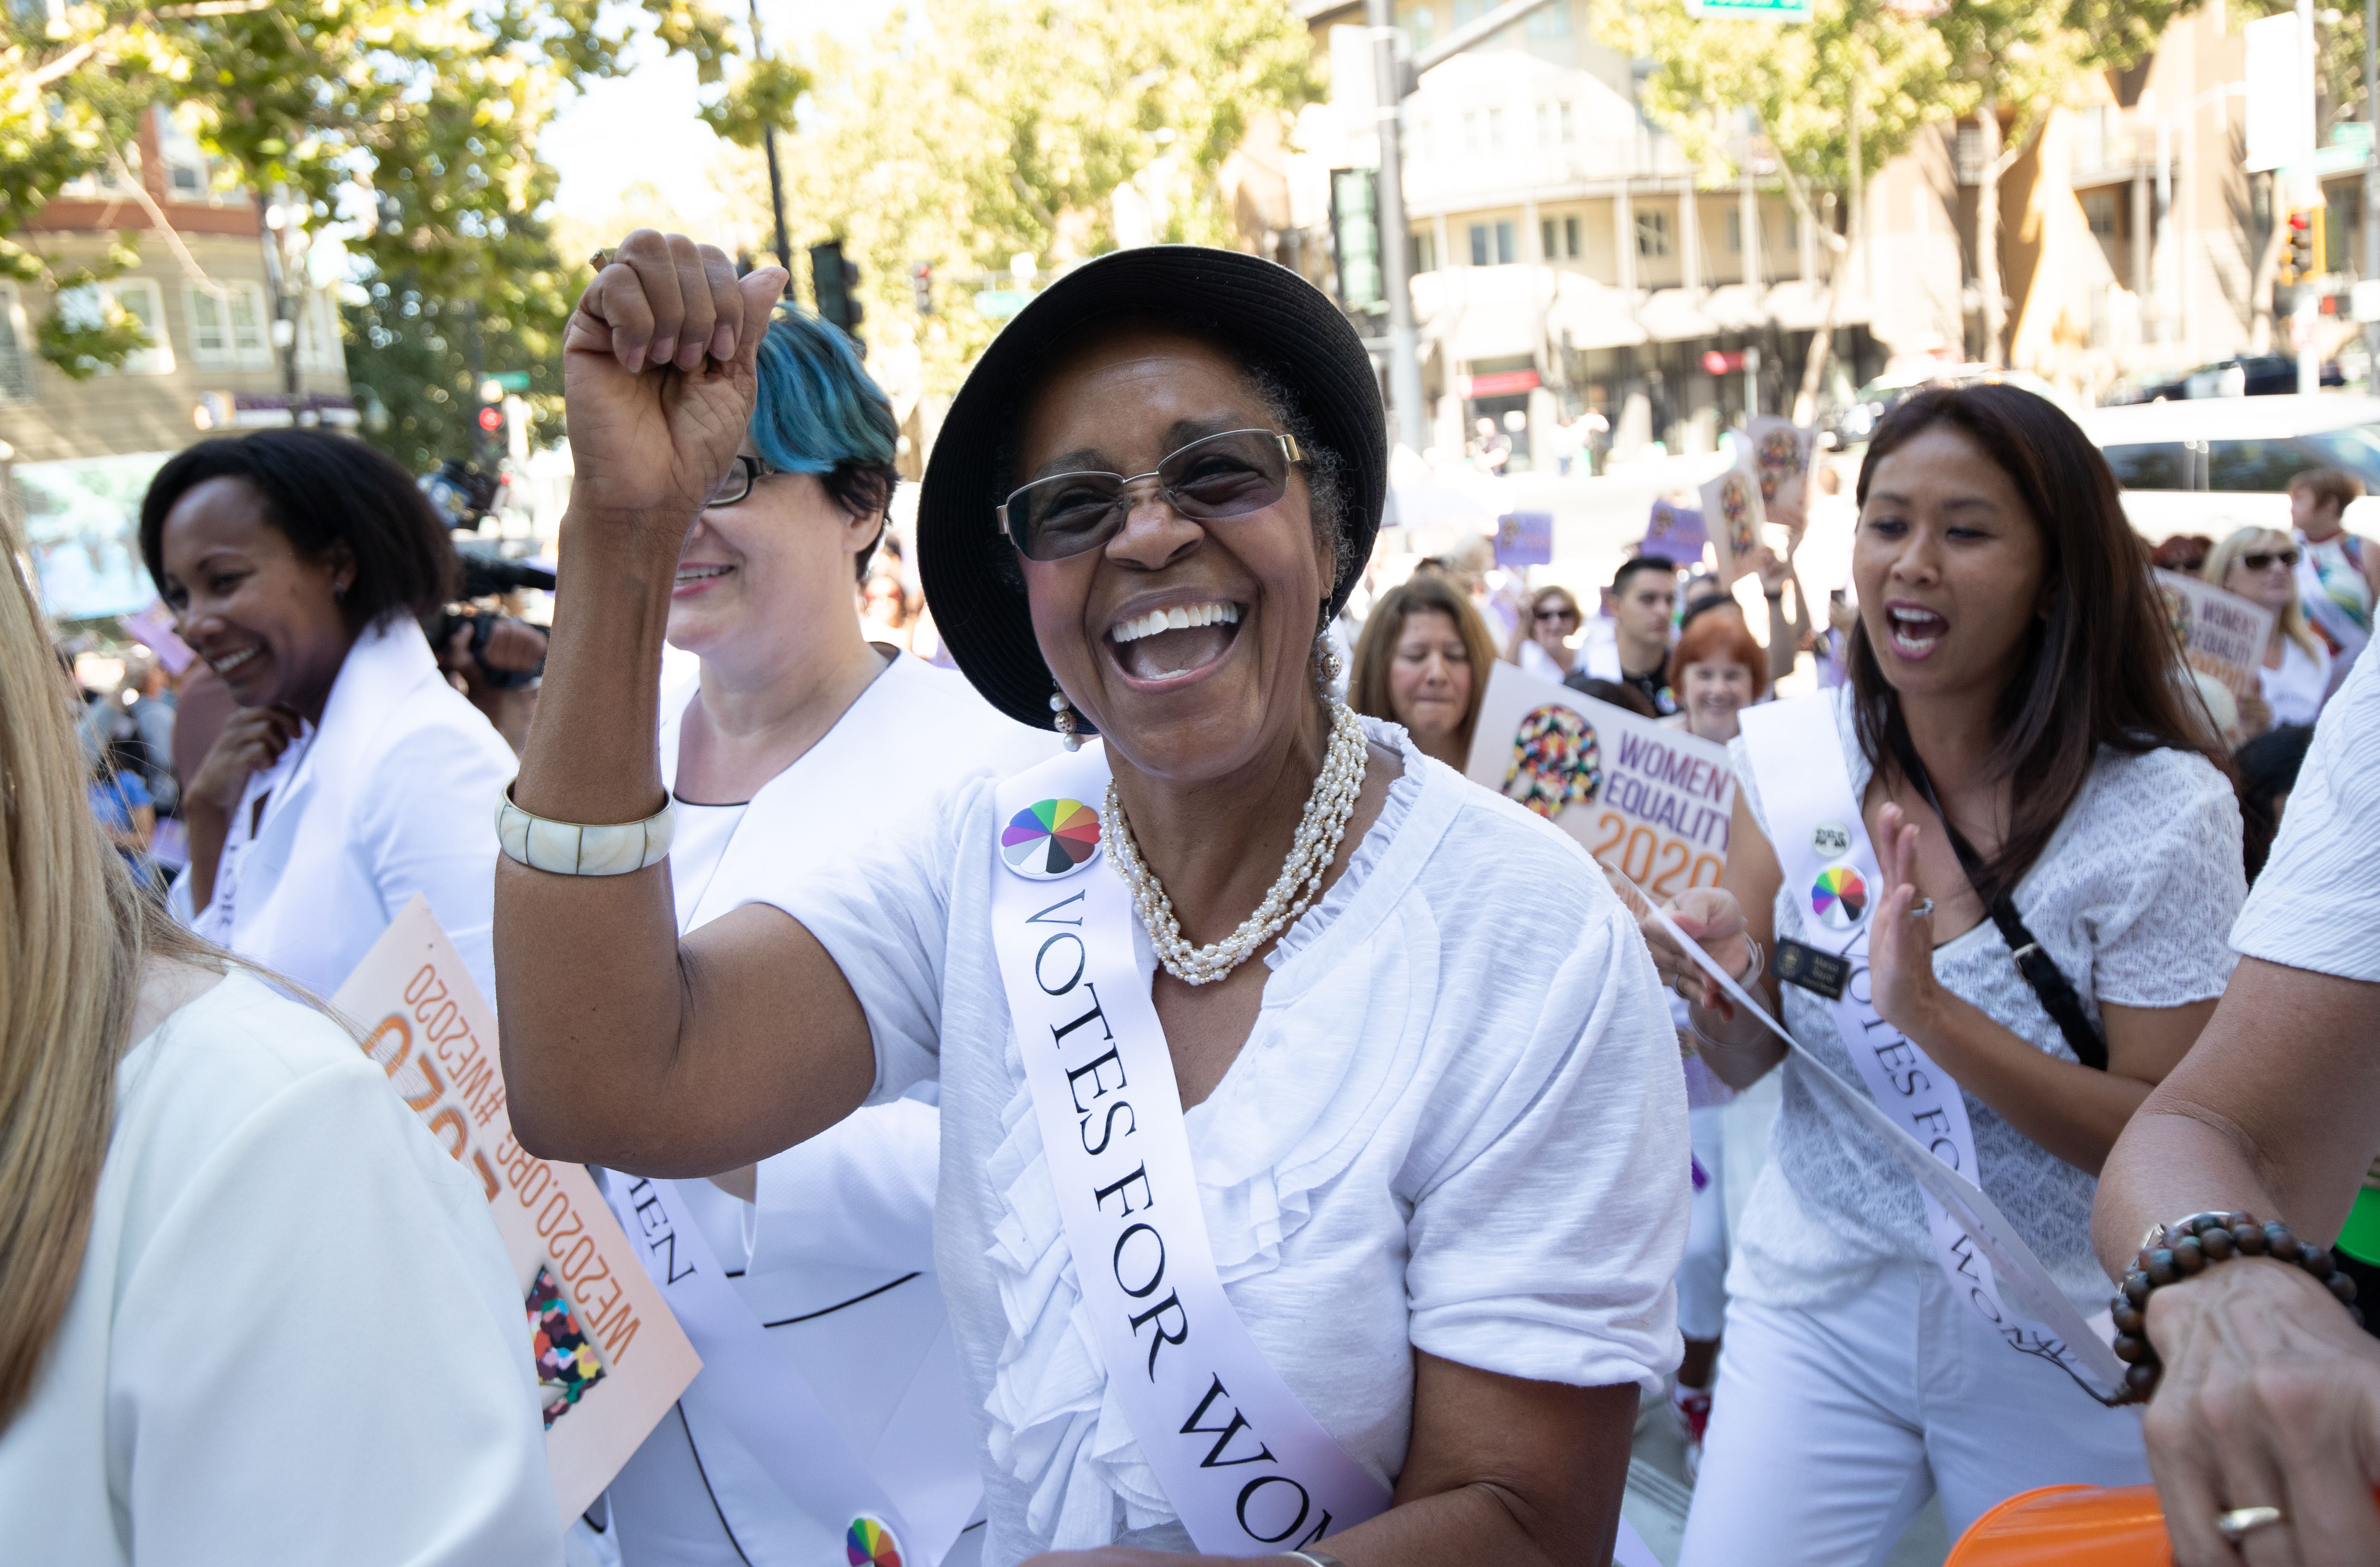 Person smiling in crowd with arm in the air, wearing a sash that reads "Votes for Women", at rally celebrating the 100th anniversary of women's right to vote, diverse crowd